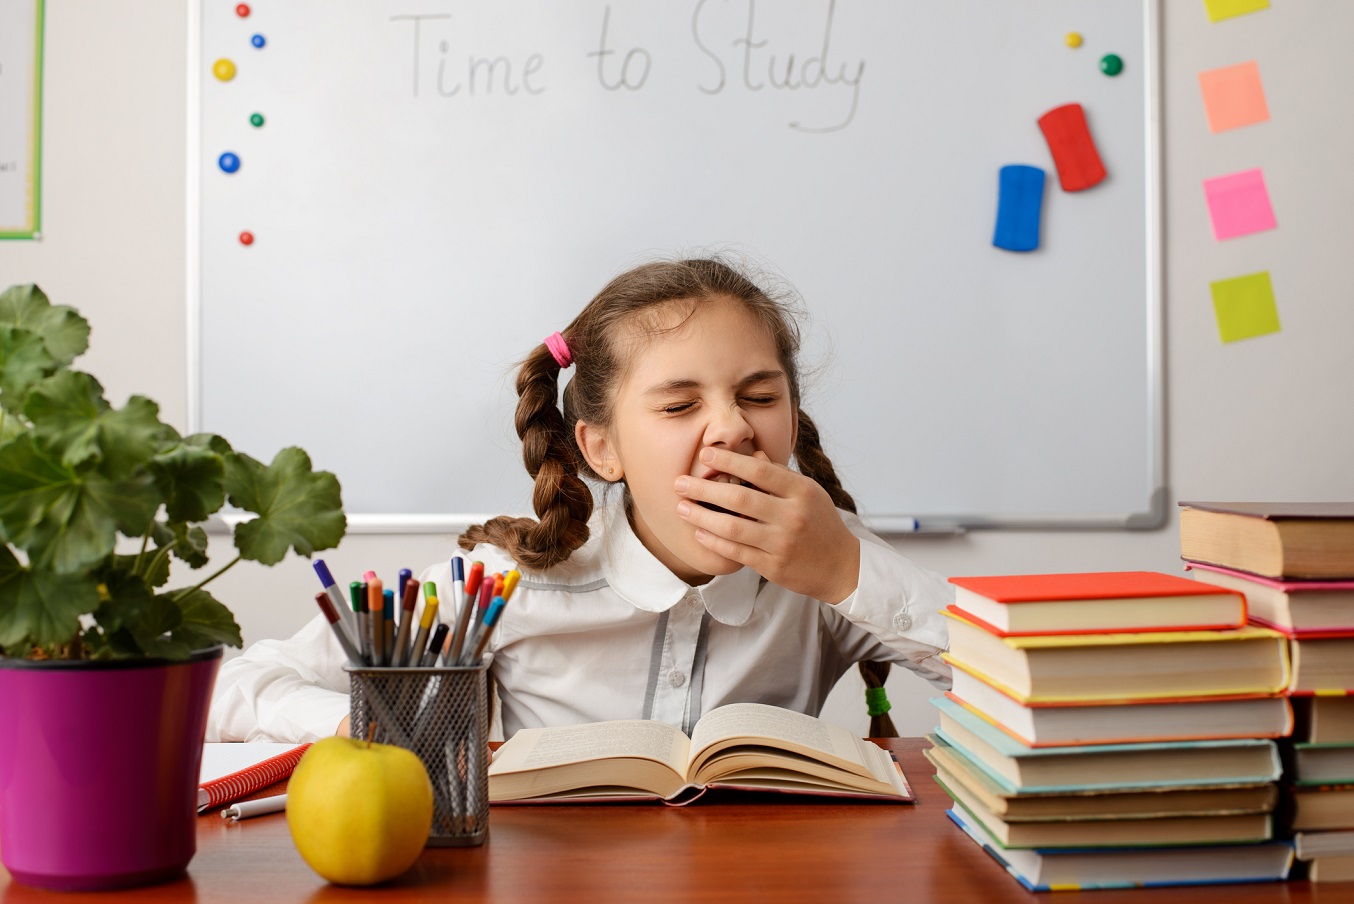 A young girl covers her mouth while she yawns, sitting at a desk in school